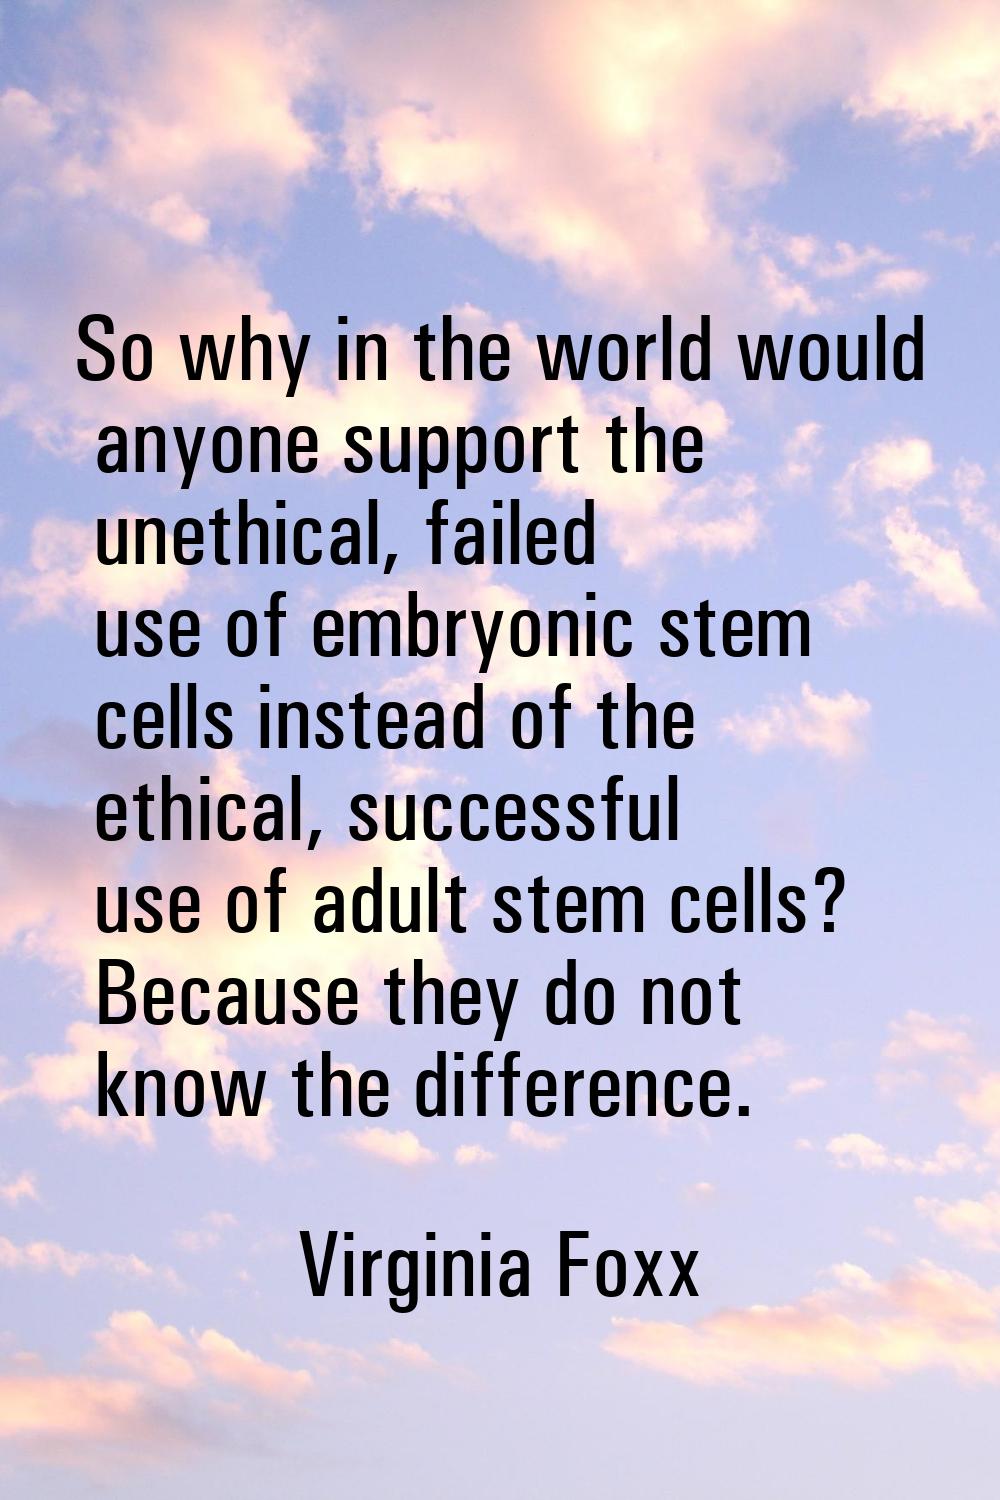 So why in the world would anyone support the unethical, failed use of embryonic stem cells instead 